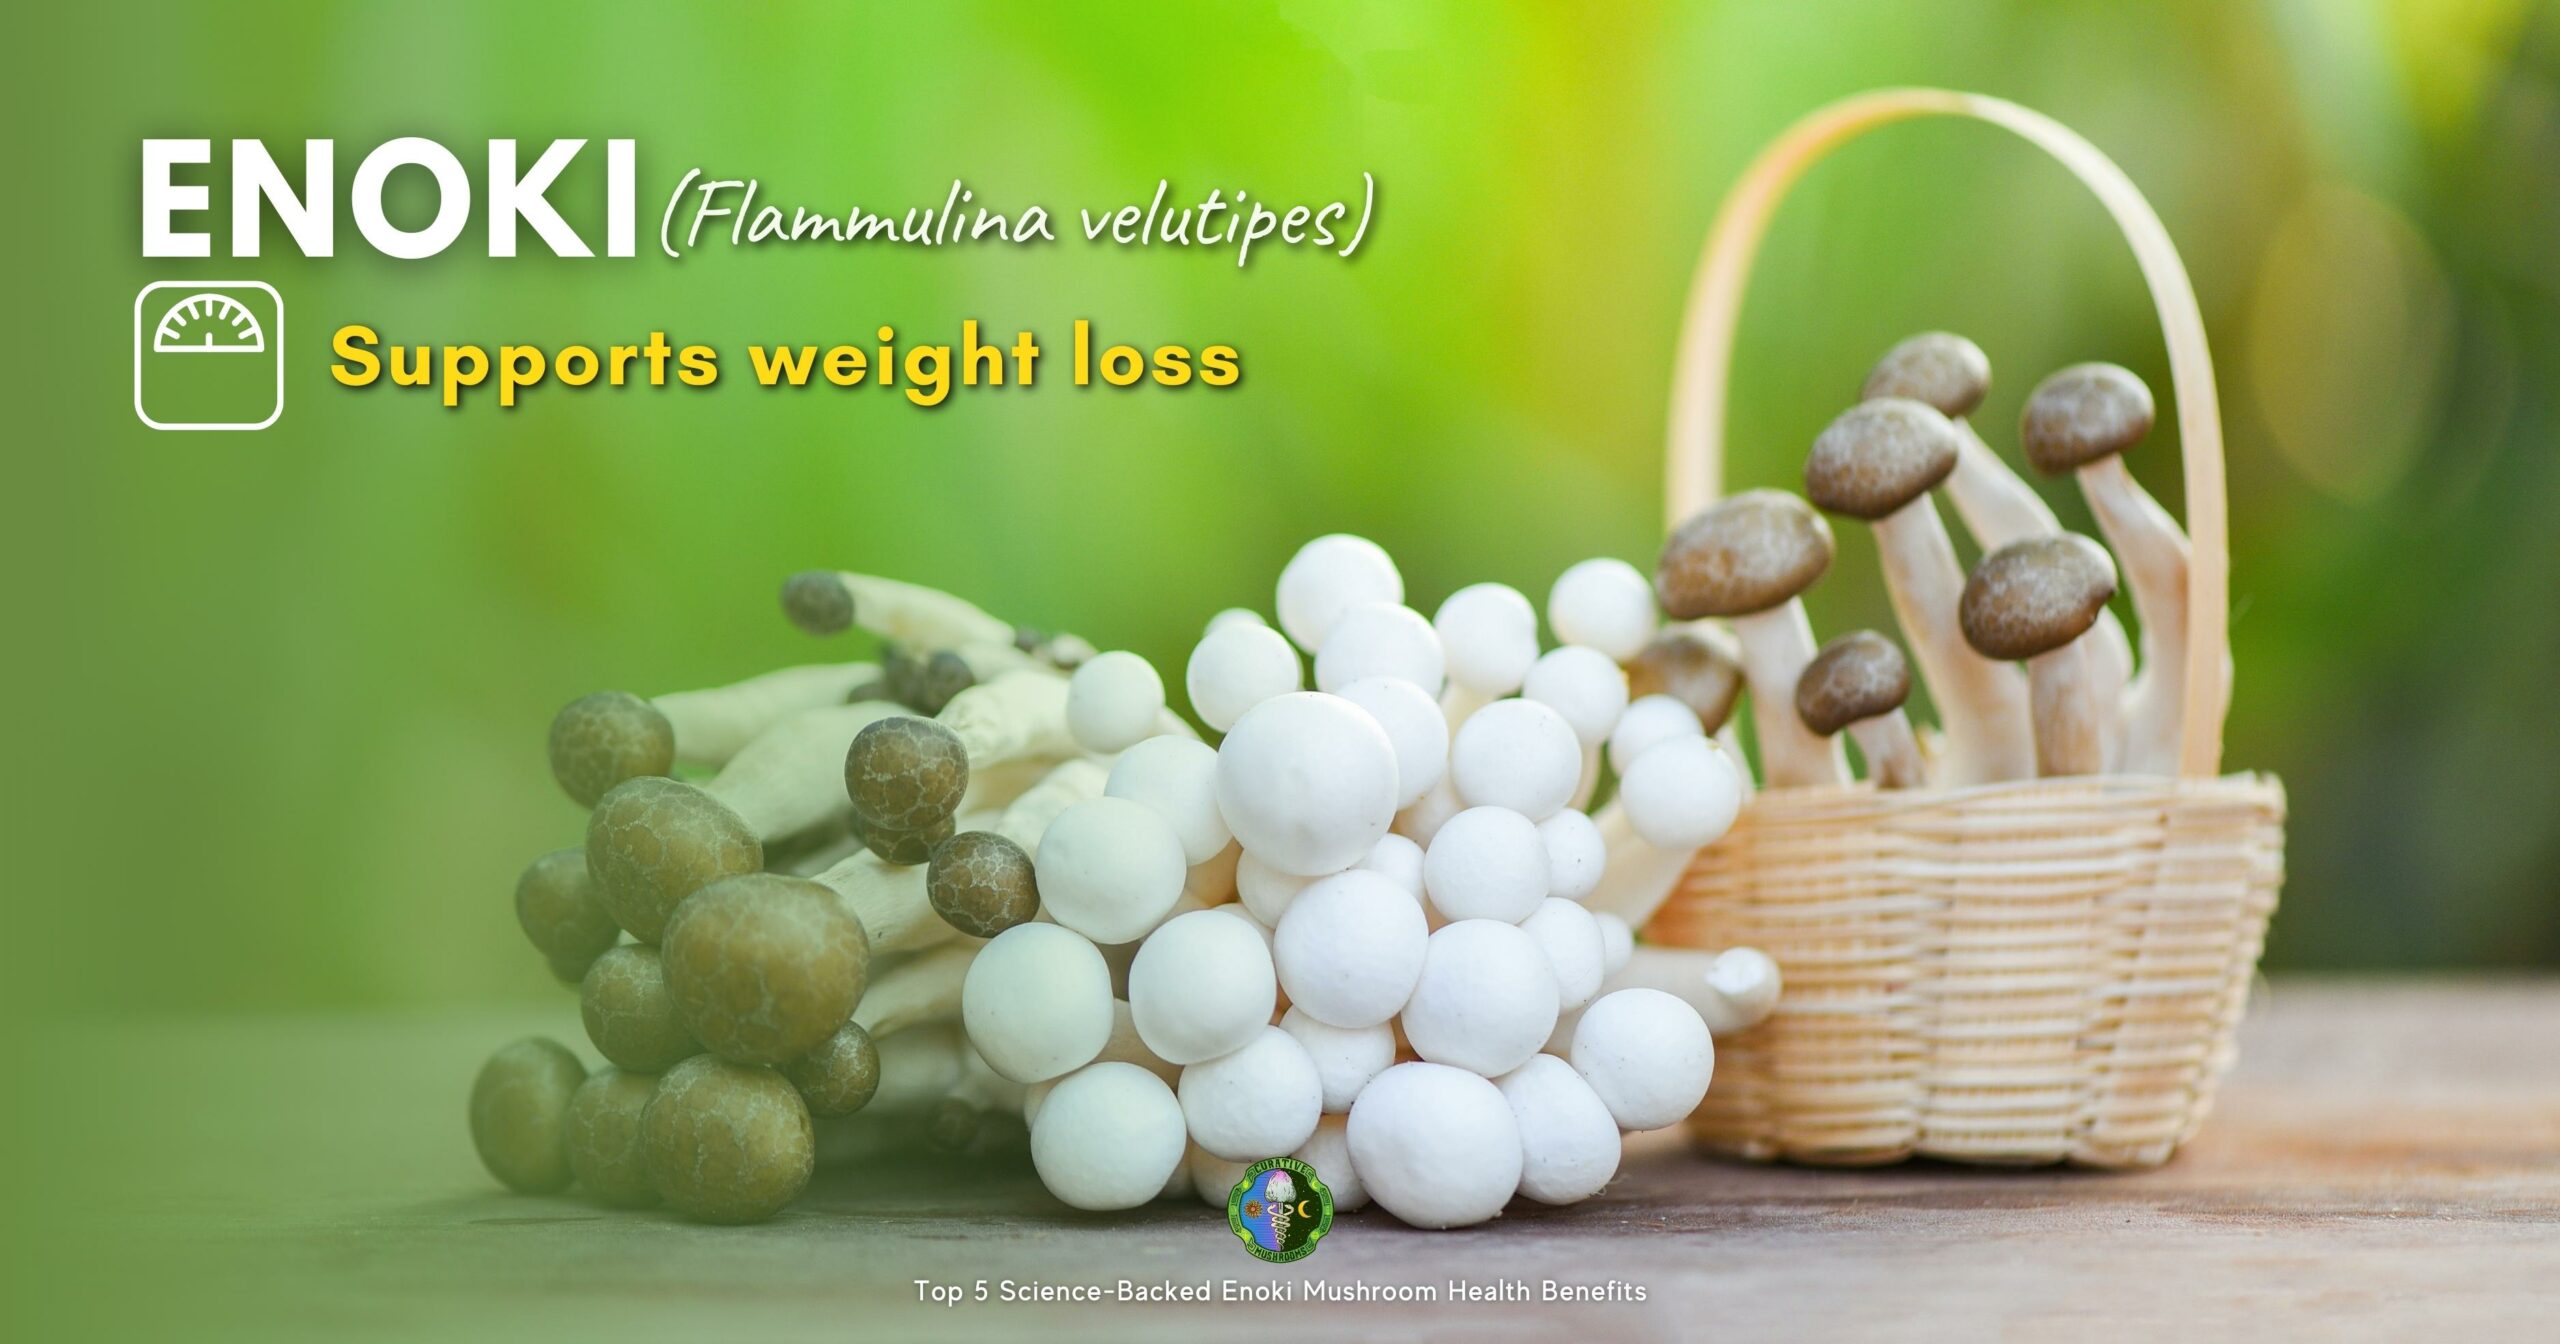 Enoki mushroom benefits health by Supporting weight loss - high fiber and linoleic acid essential omega-6 fatty acid promote feelings of fullness and regulate fat metabolism